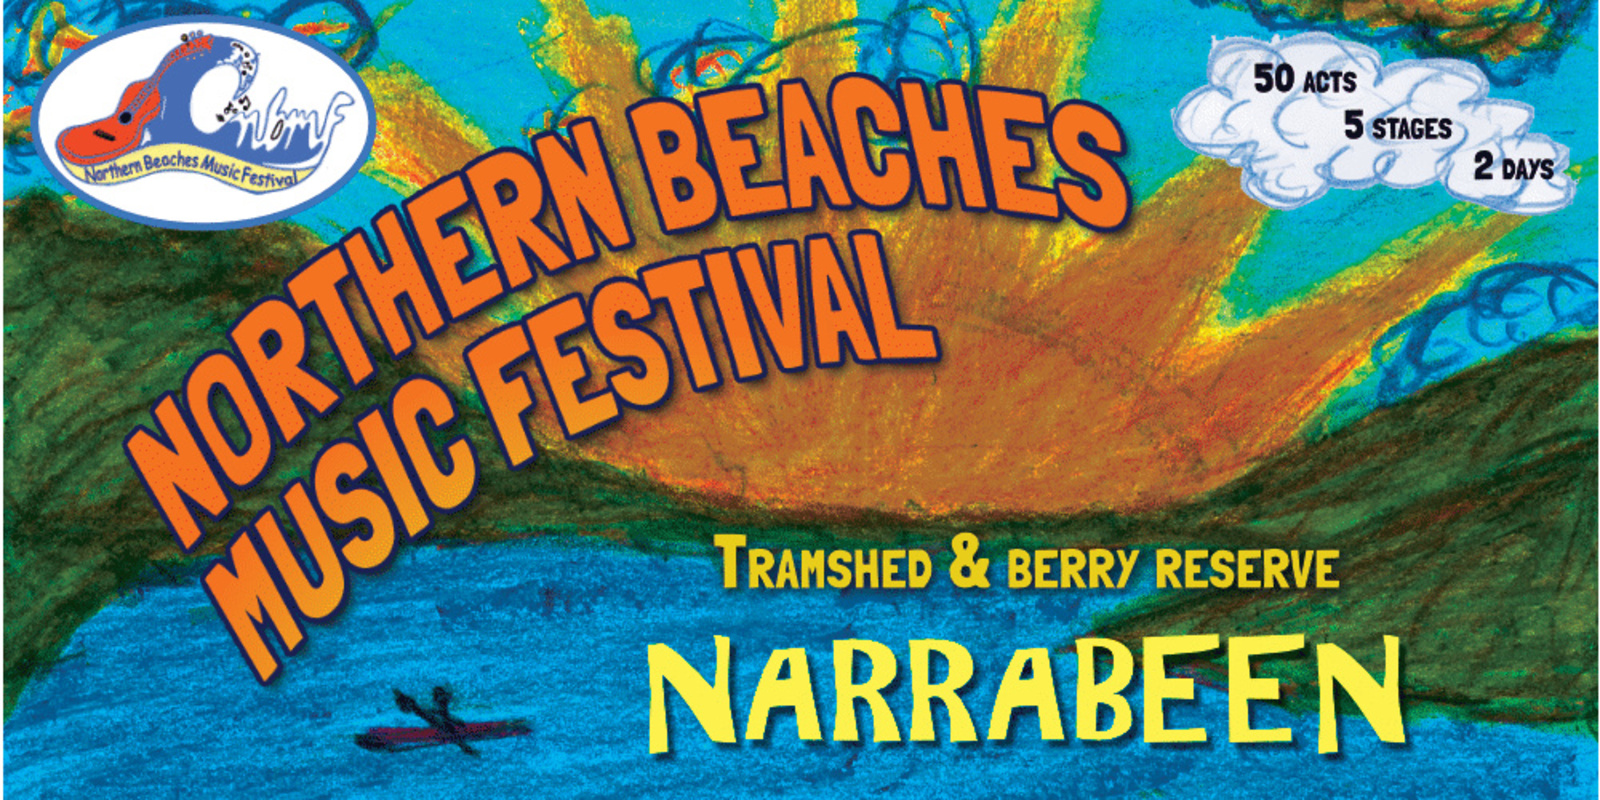 Banner image for 2022 Northern Beaches Music Festival